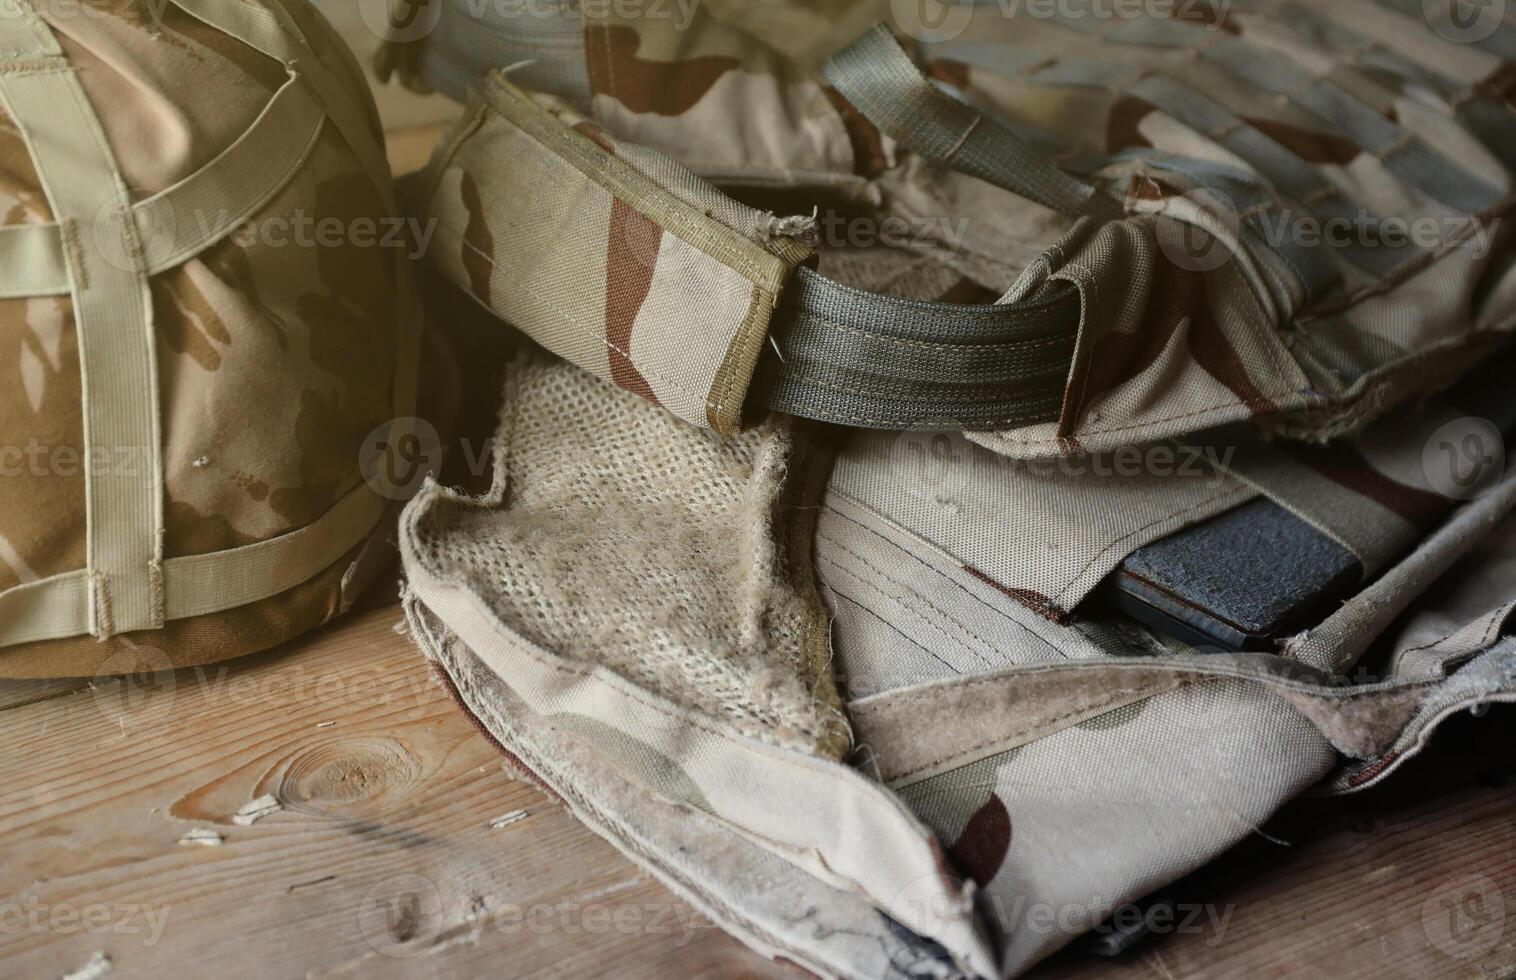 A military helmet of a Ukrainian soldier with a heavy bulletproof vest on wooden table in checkpoint dugout photo